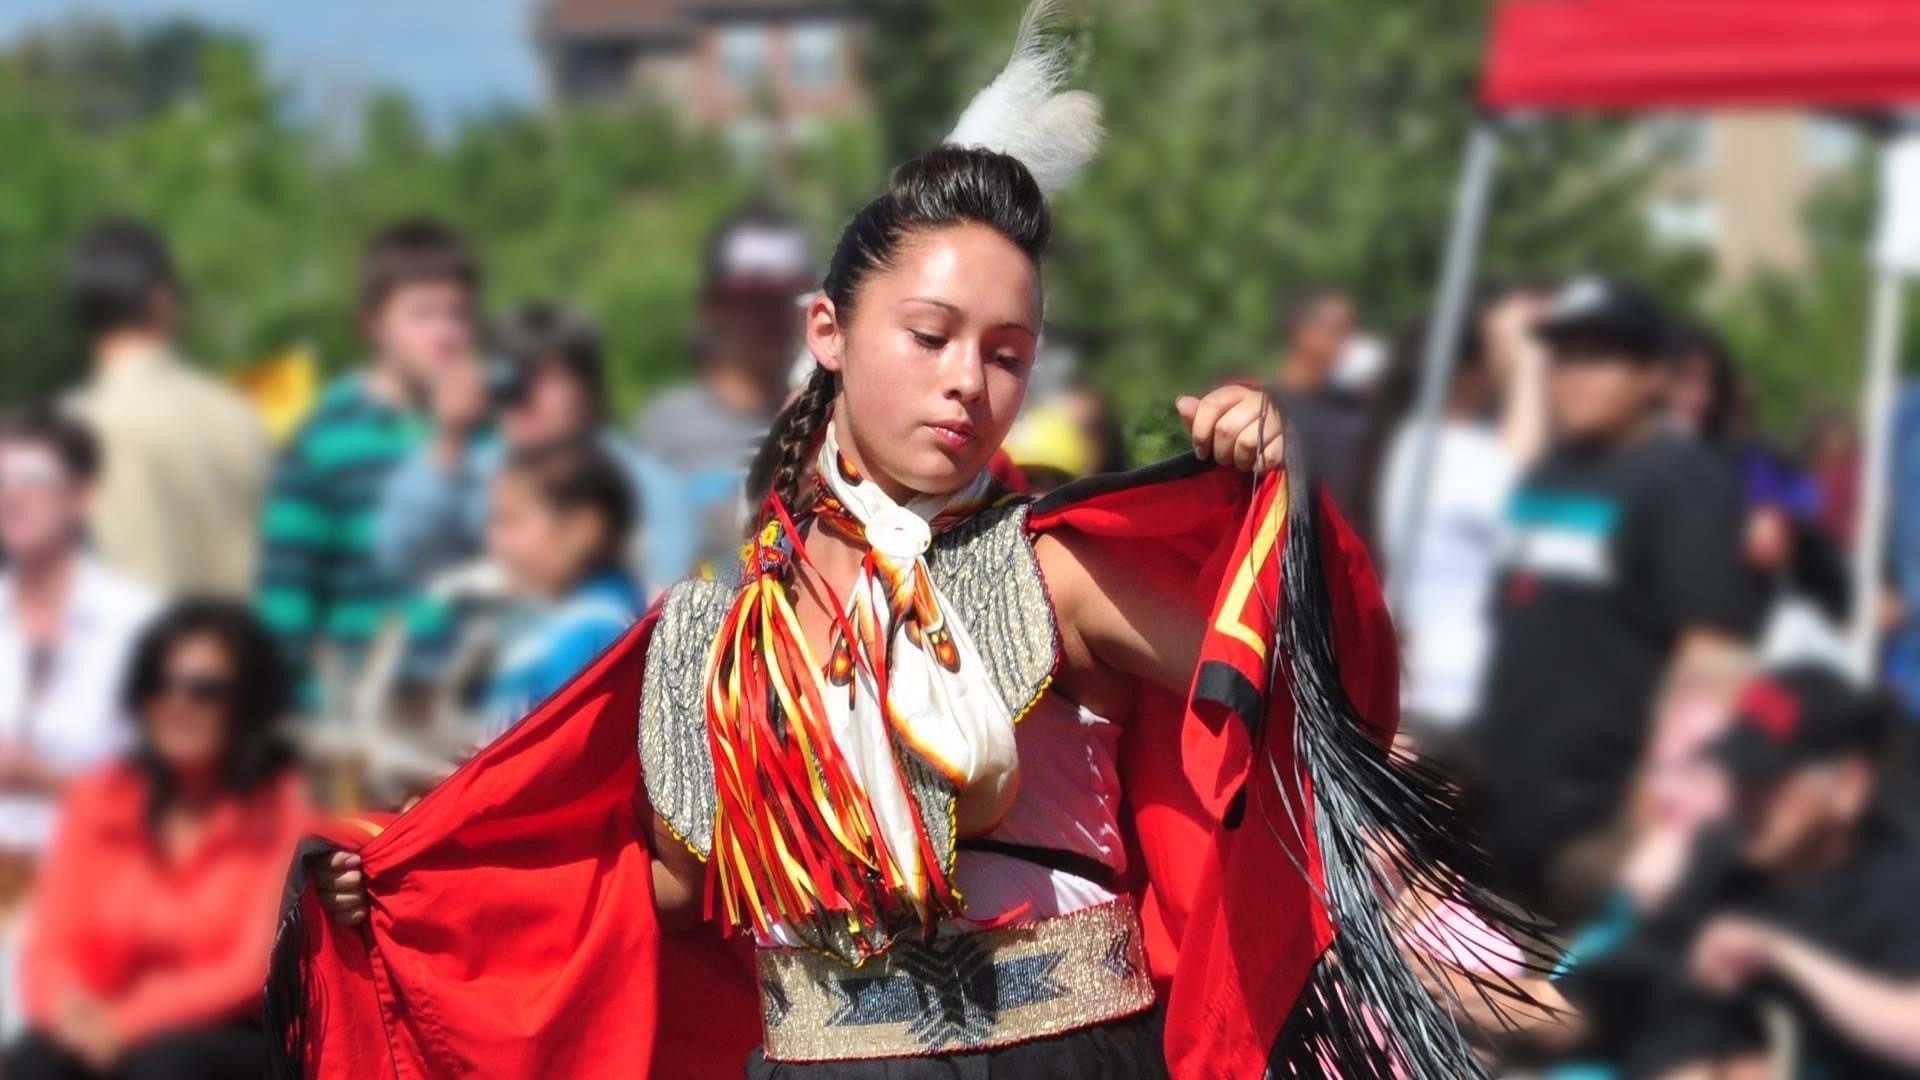 The Akwesasne International Pow Wow set to return for their 20th annual event, September 10 & 11, 2022 at the A'nowara'ko:wa Arena, Cornwall Island, Ontario. 

On the shores of the beautiful St. Lawrence River, visitors can enjoy the two-day event with good music, good food and good company. The Akwesasne Pow Wow brings together the best Native artisans, drummers and dancers from this region.